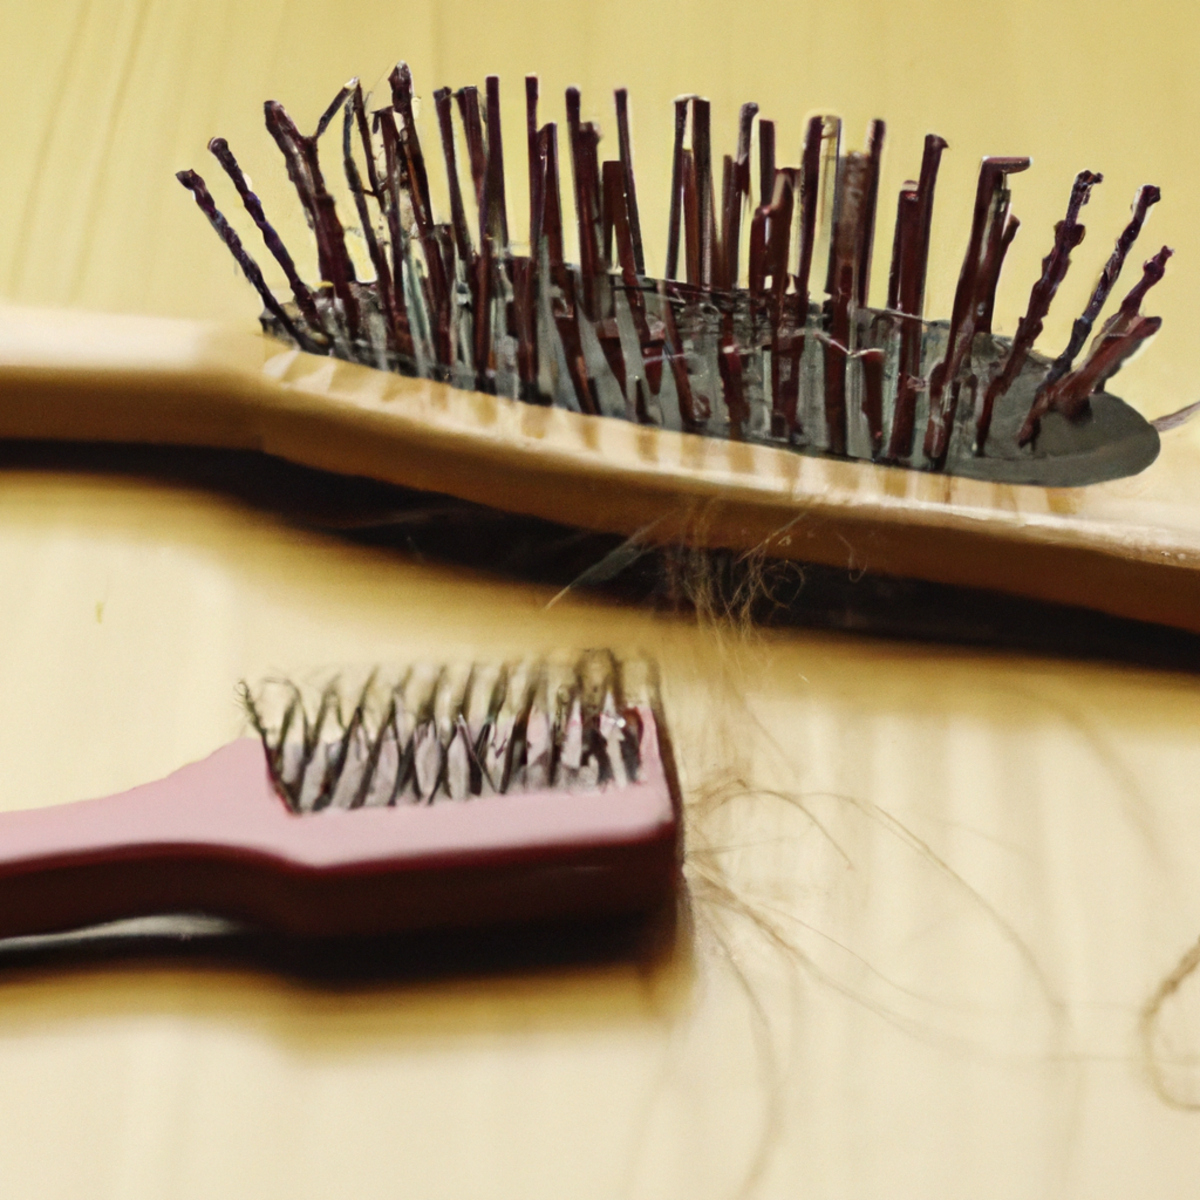 A table with hair loss treatment objects: supplements, hairbrush, laser device, shampoo, scalp massager, and transplant brochure.